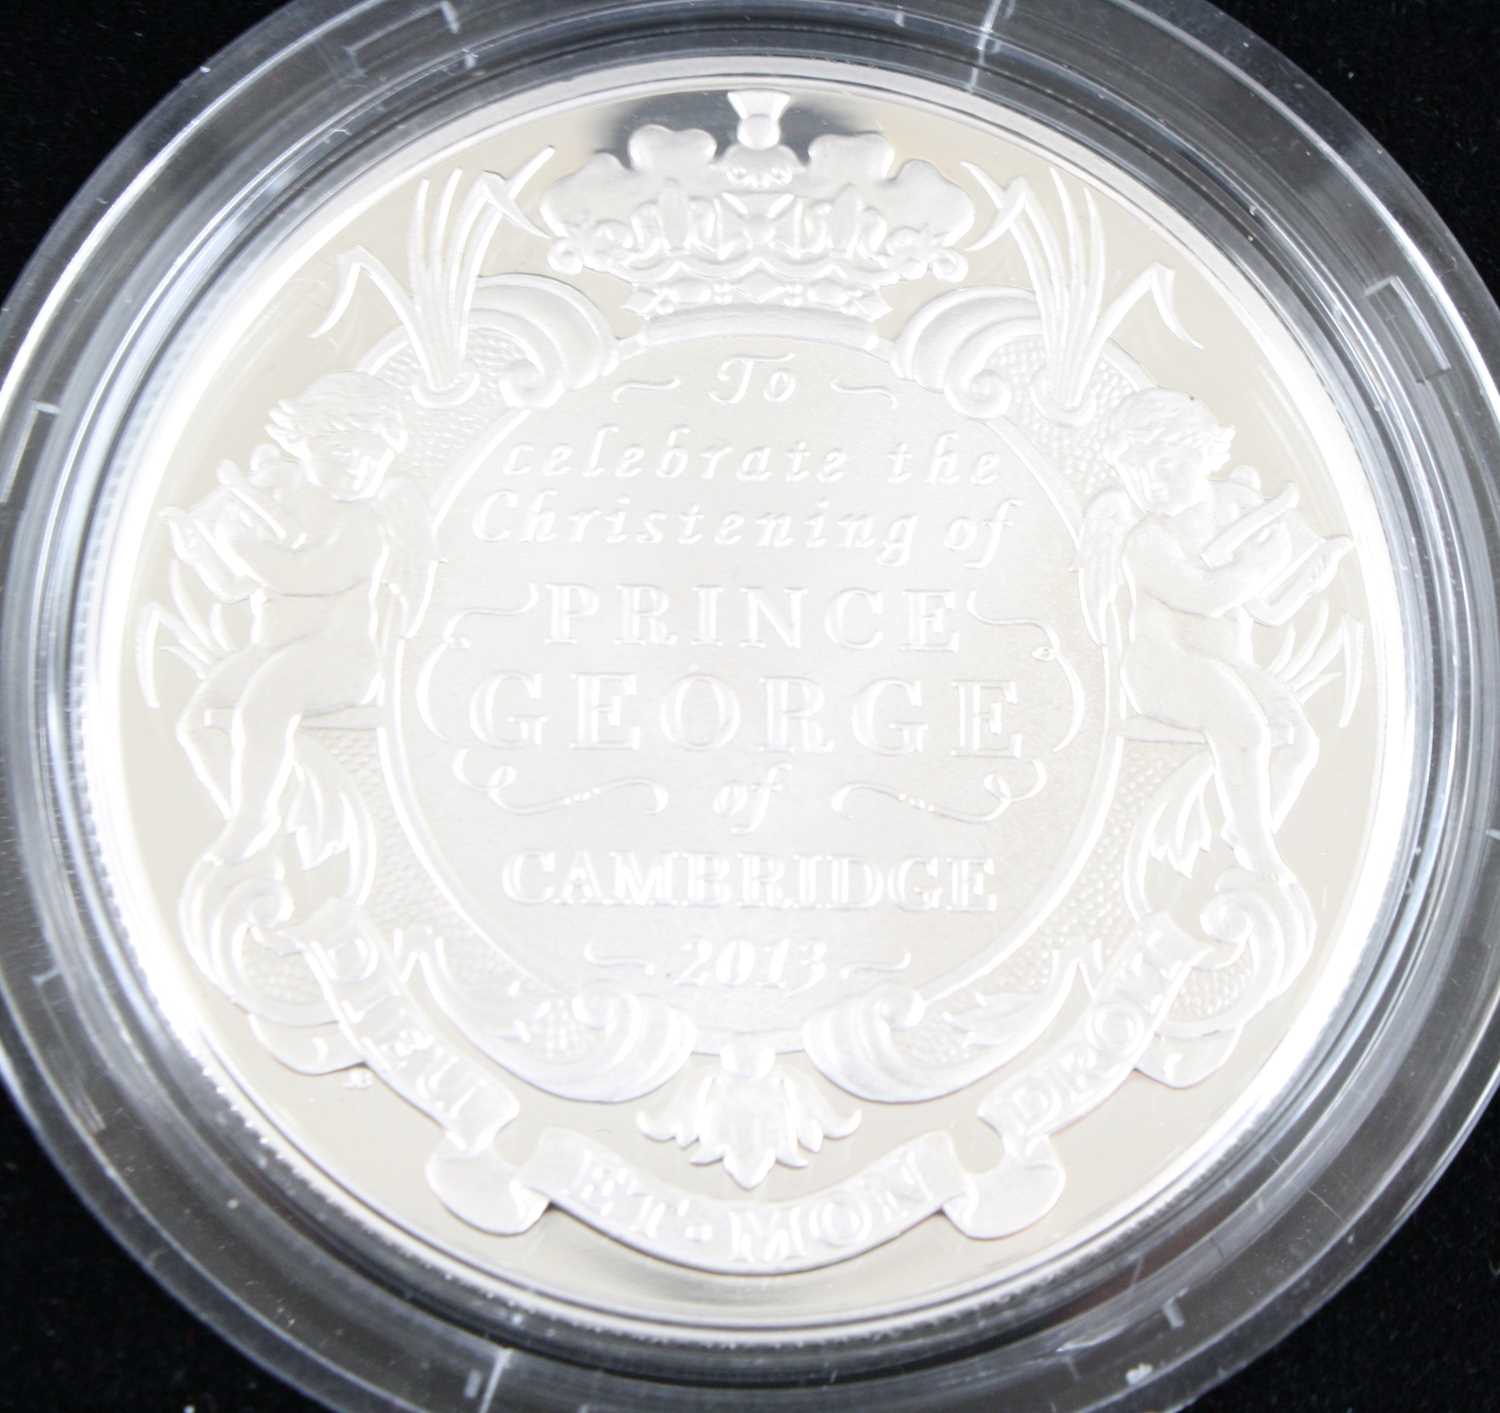 United Kingdom, The Royal Mint, The Christening of H.R.H. Prince George of Cambridge, 2013 Silver - Image 2 of 2